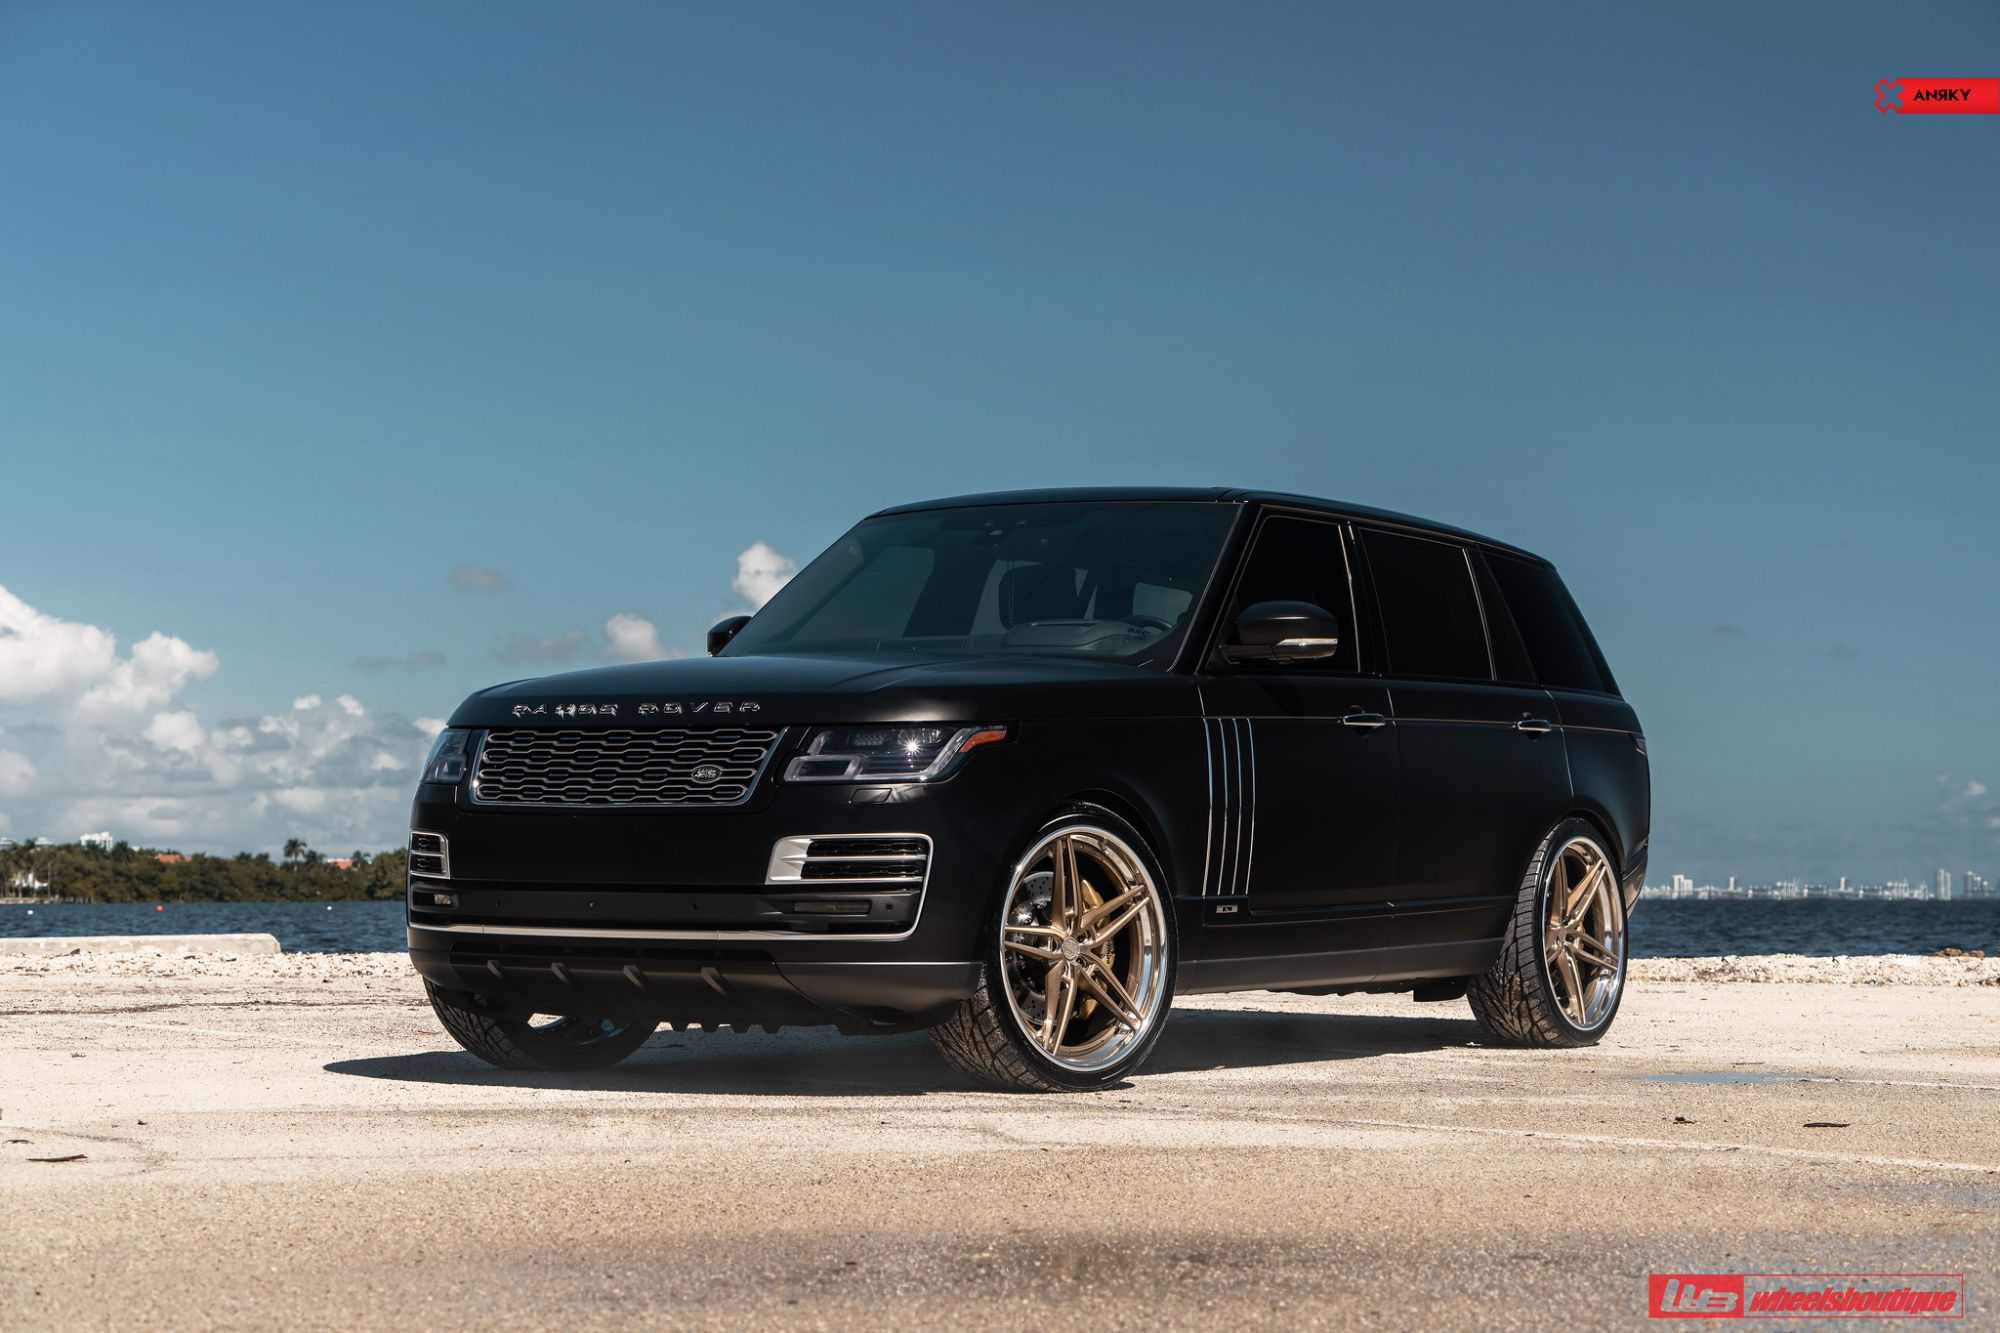 Range Rover LWB Autobiography Black with ANRKY AN37 Aftermarket Wheels